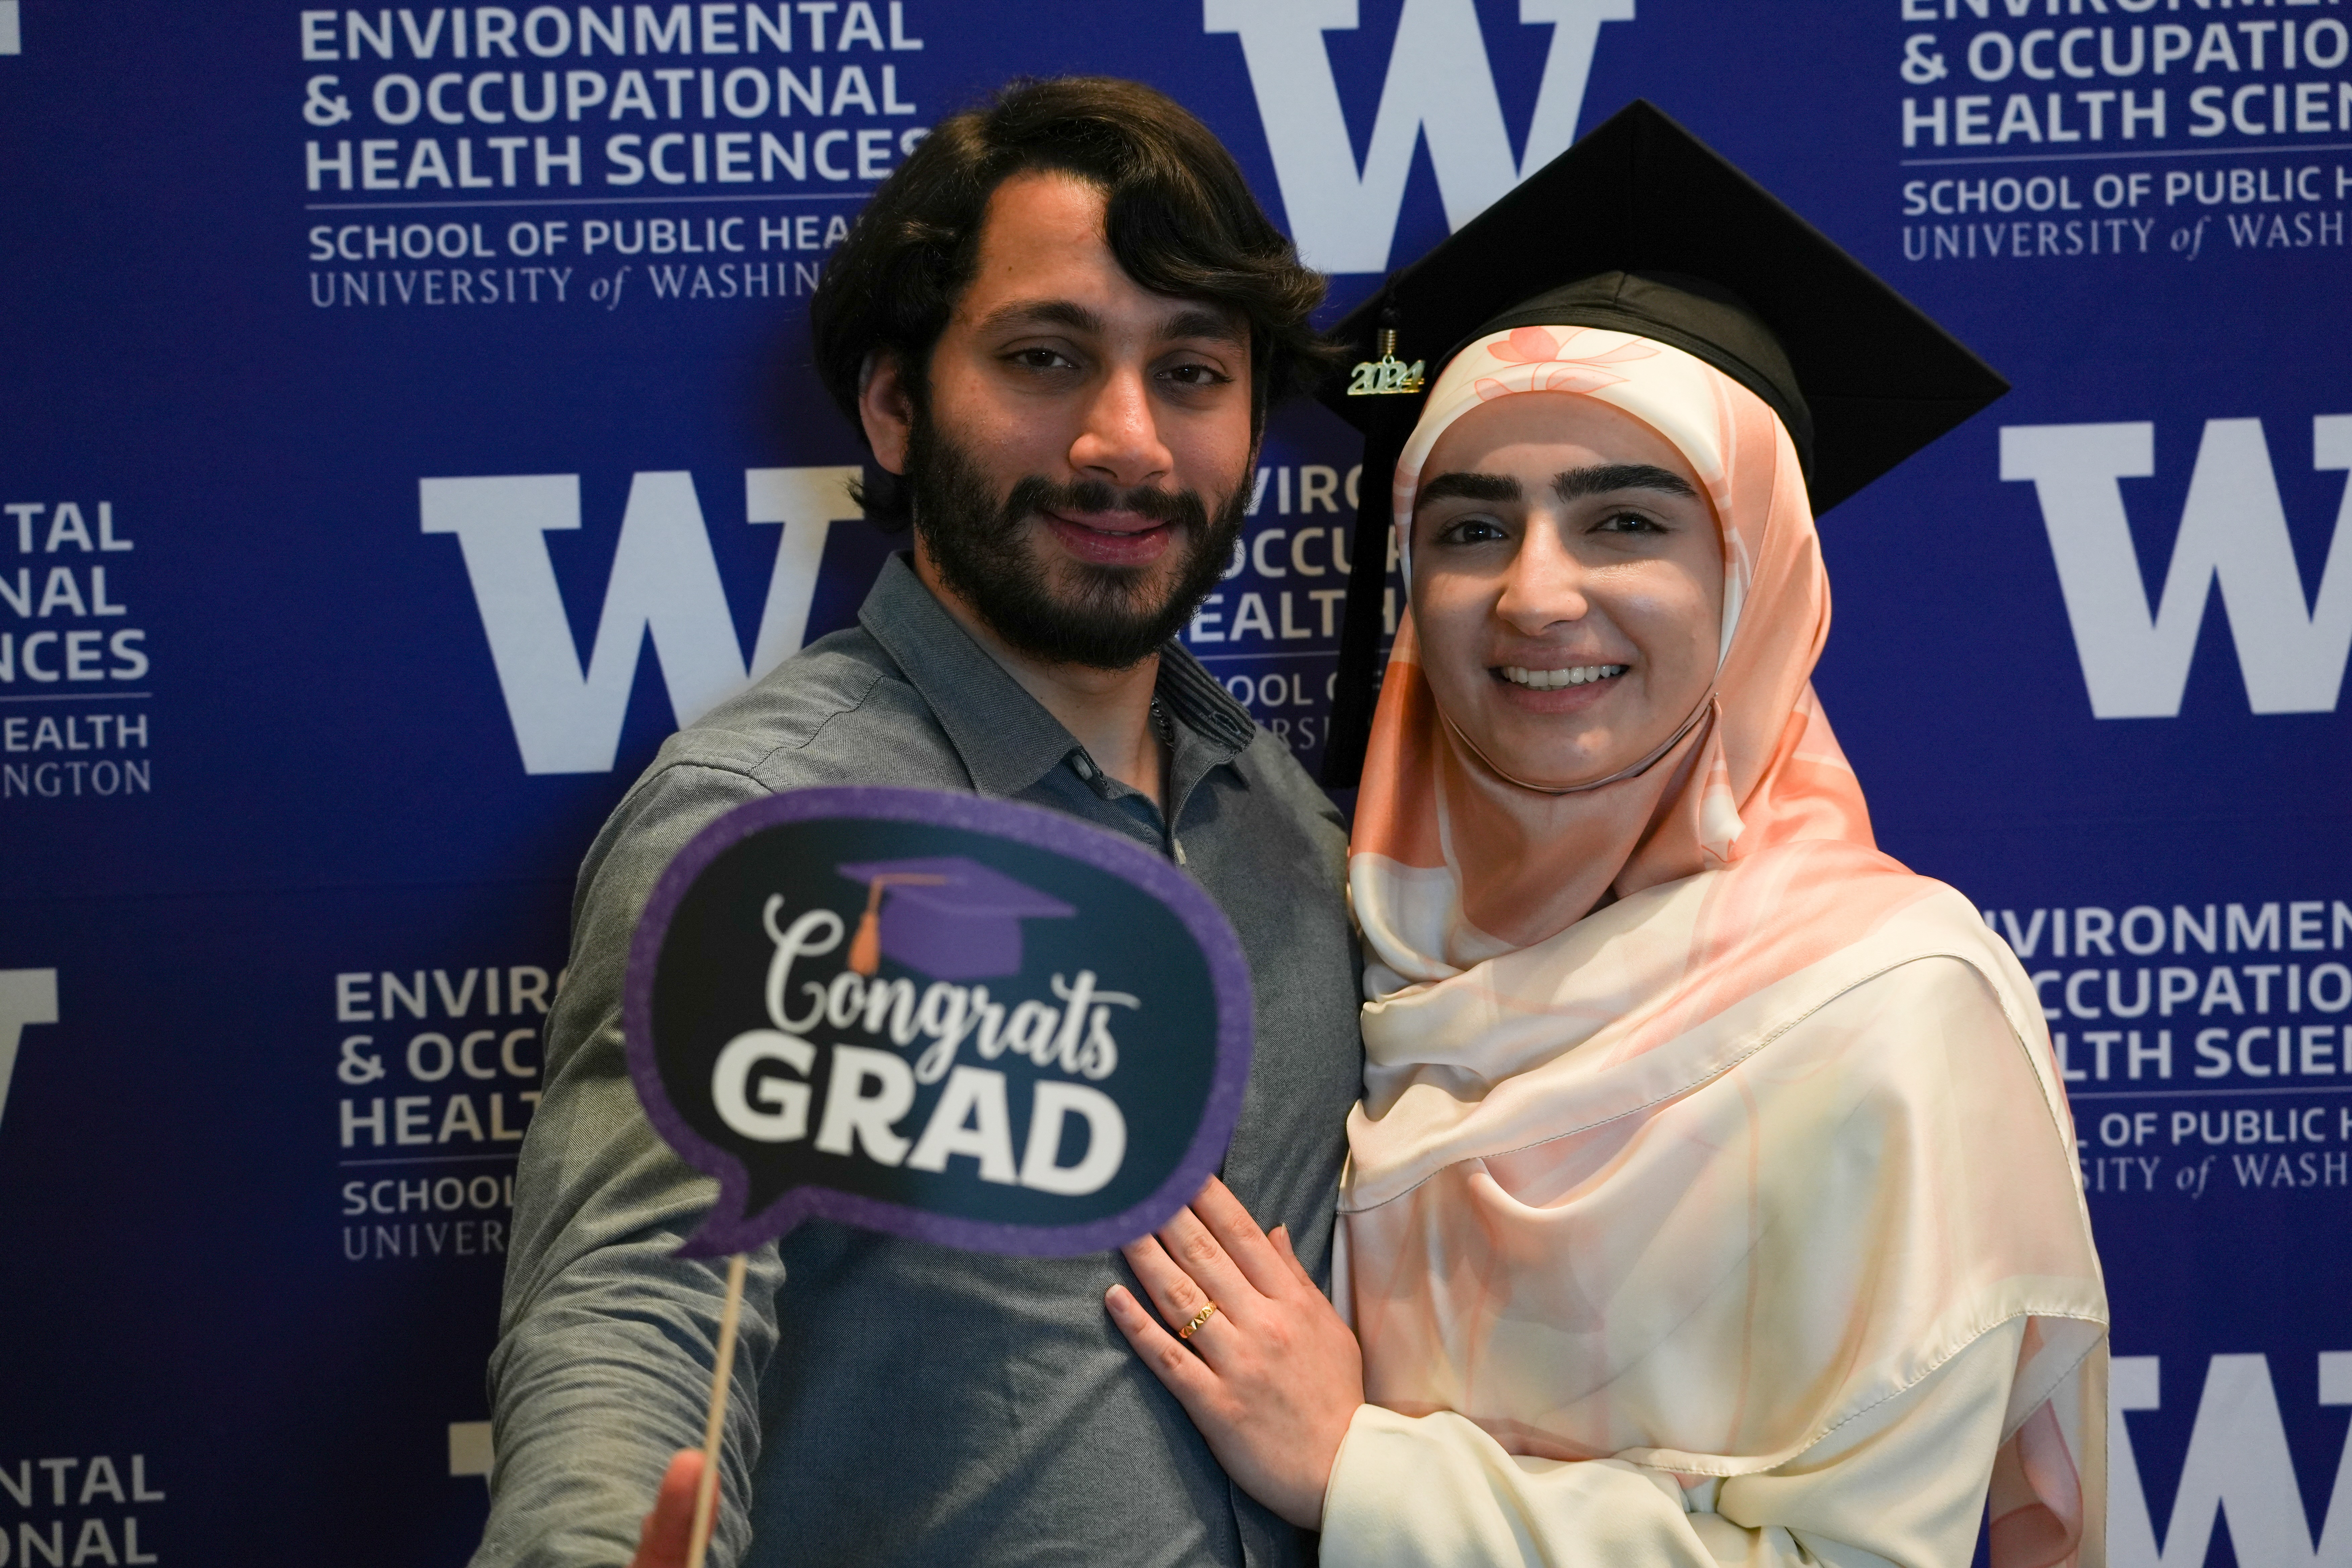 One student poses in a graduation cap and another person poses with her holding a photo booth prop that says Congrats Grad. They stand in front of a purple and white backdrop that says Environmental and Occupational Health Sciences School of Public Health University of Washington. 